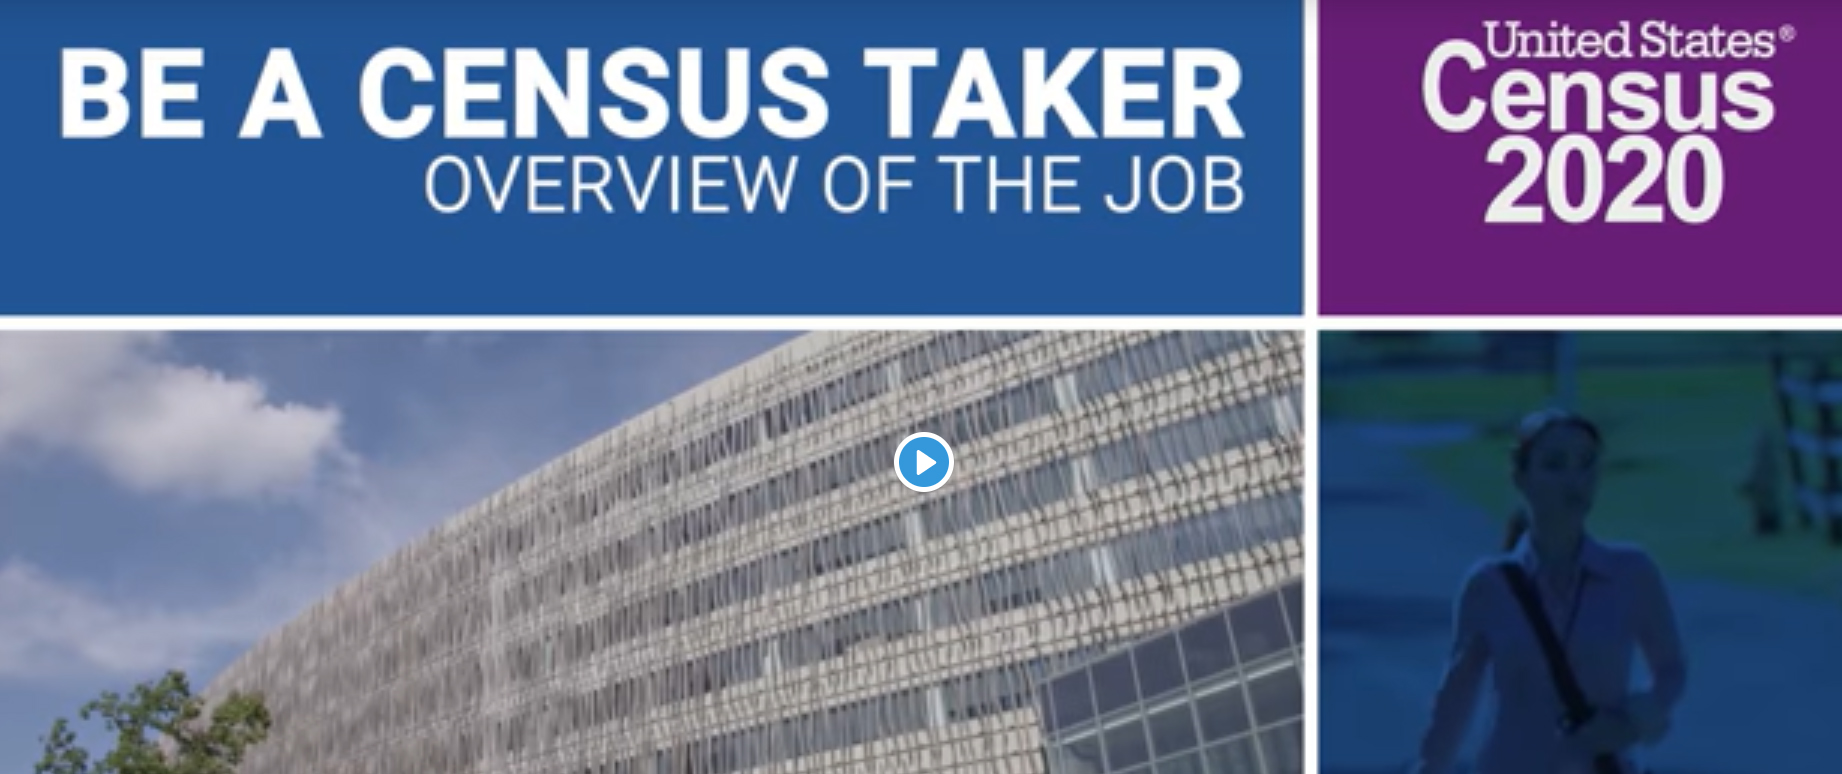 Be A Census Taker